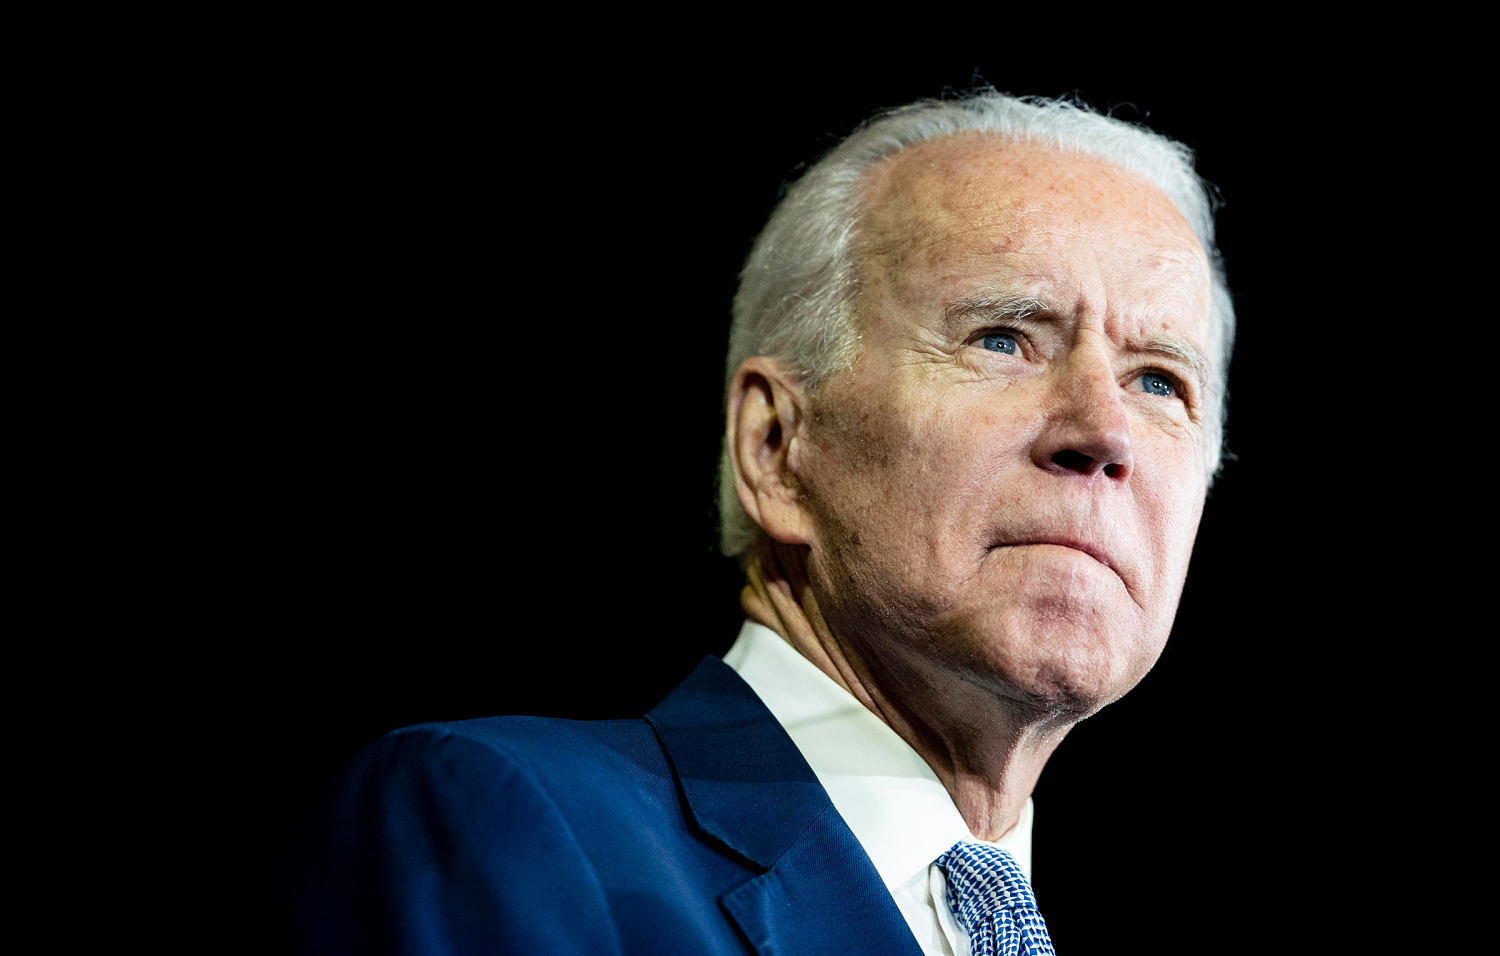 Eight more Democrats, including Pelosi allies, call for Biden to exit 2024 election